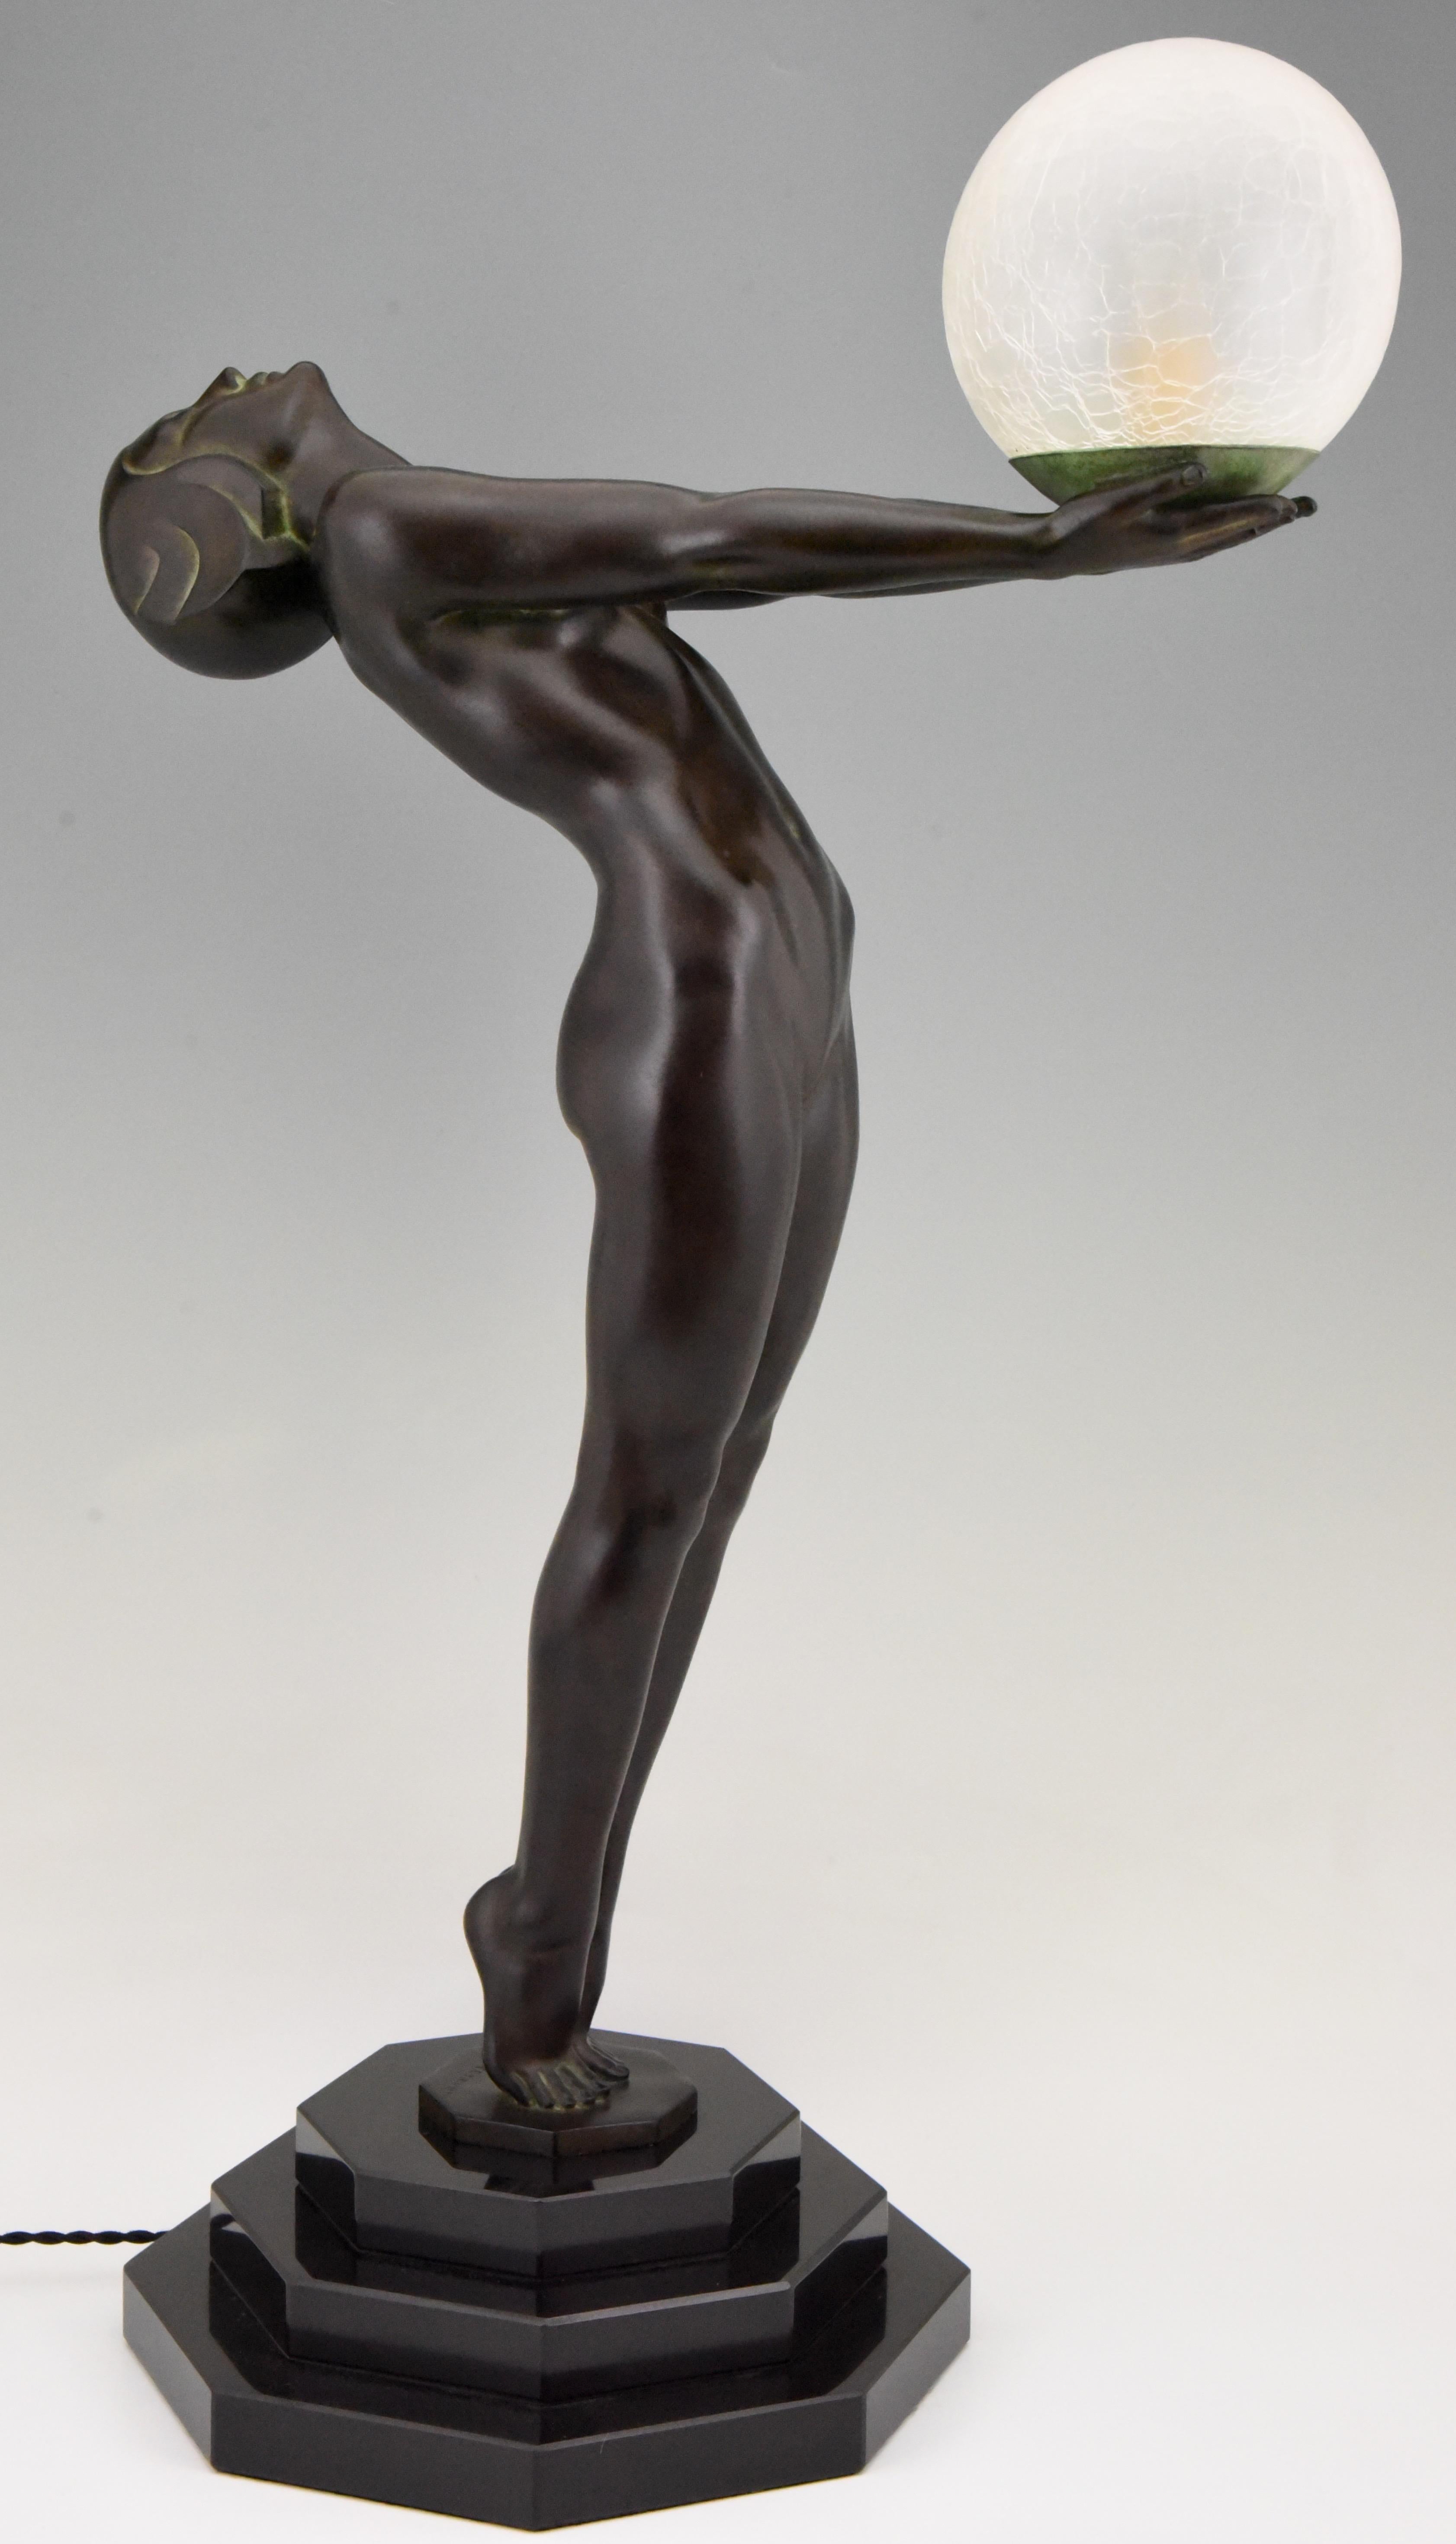 Contemporary Art Deco style Lamp Clarté Nude with Globe by Max Le Verrier H. 33 inch / 84 cm For Sale